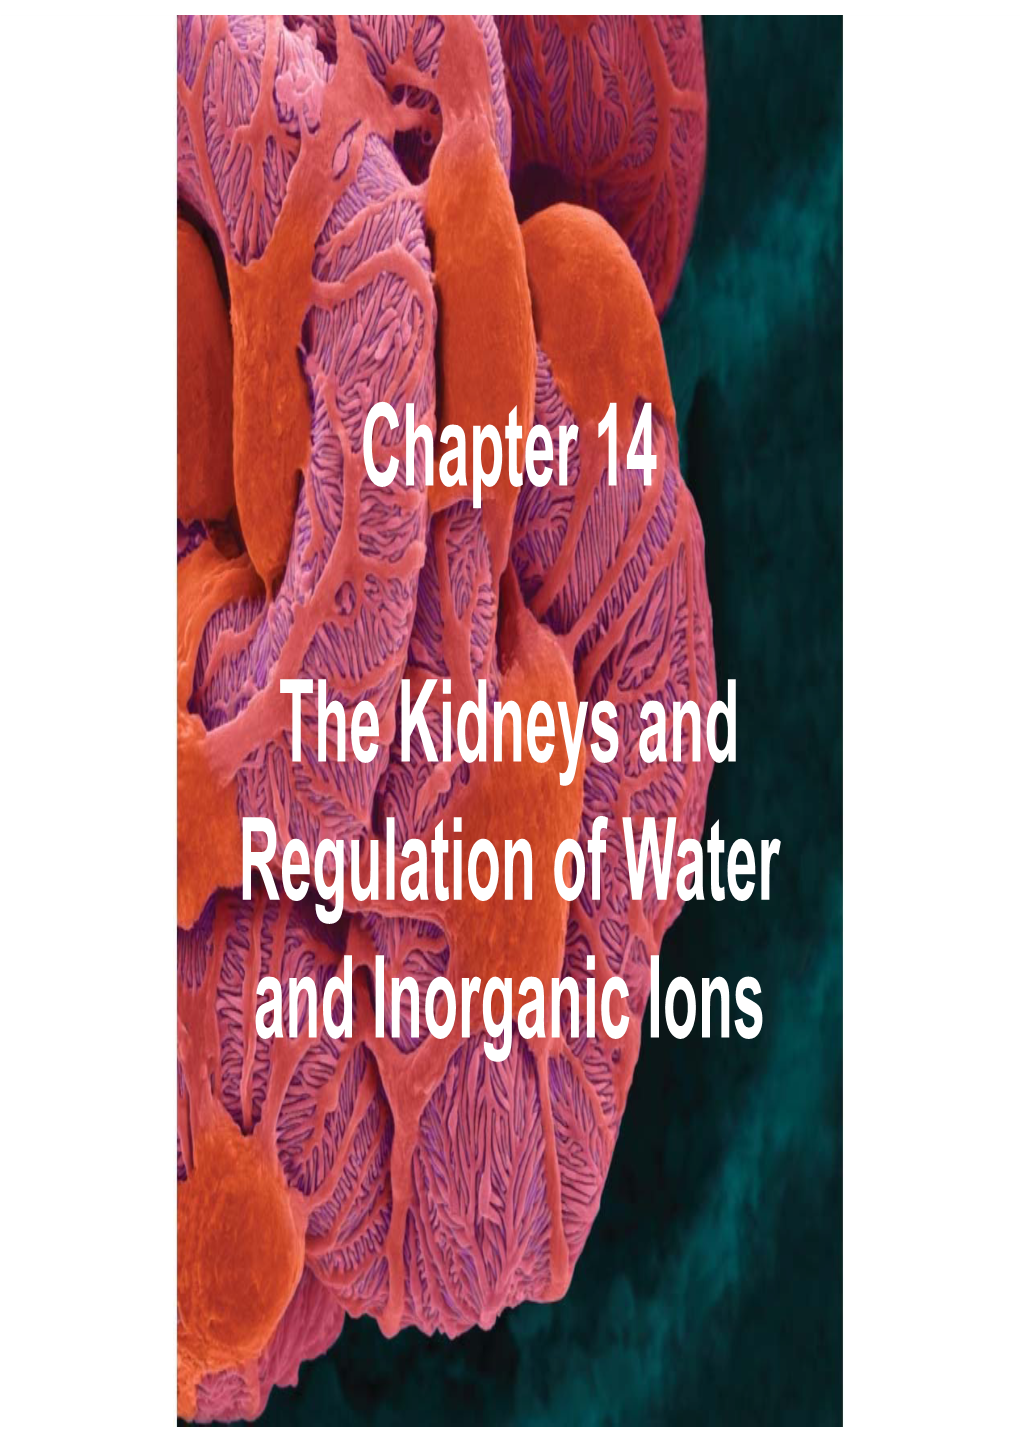 Chapter 14 the Kidneys and Regulation of Water and Inorganic